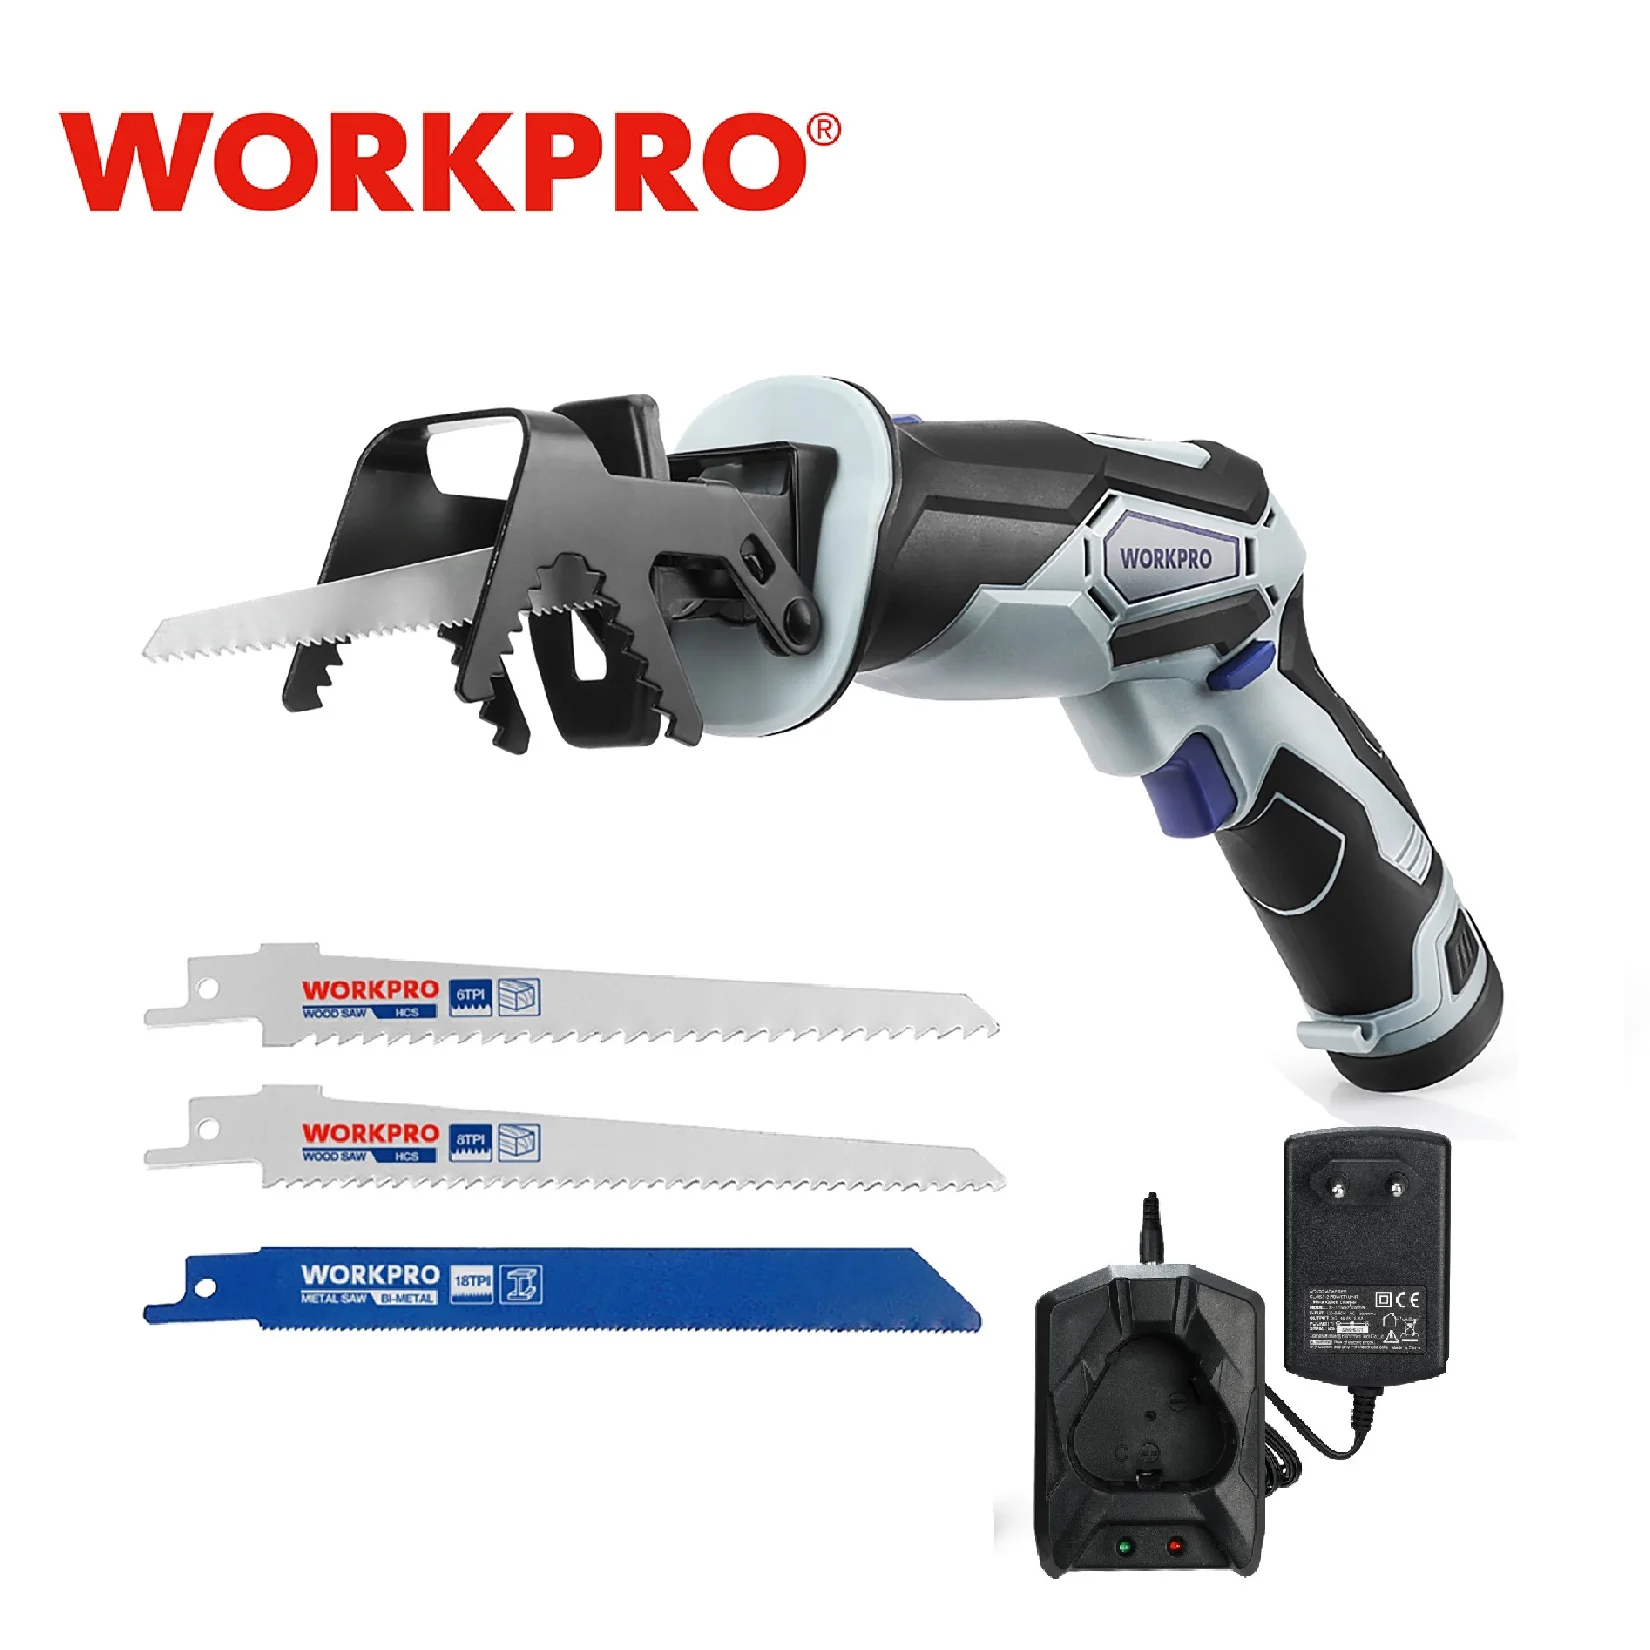 

WORKPRO 12V Cordless Electric Reciprocating Saw Cutting Saw Portable Cordless Power Tools For Wood &Metal With 3 Saw Blades Tool